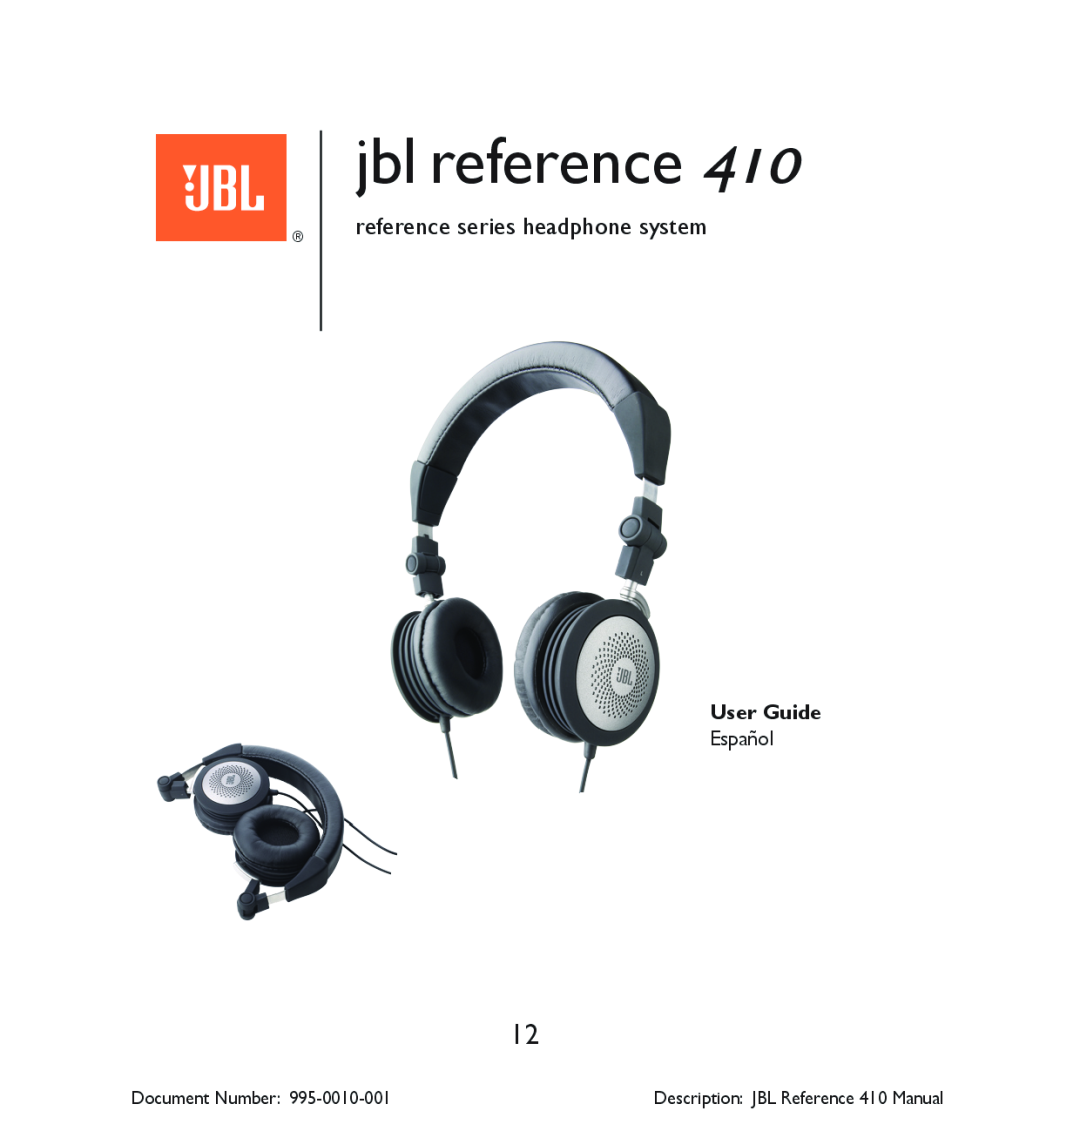 JBL 410 manual reference series headphone system, jbl reference, User Guide, Document Number 